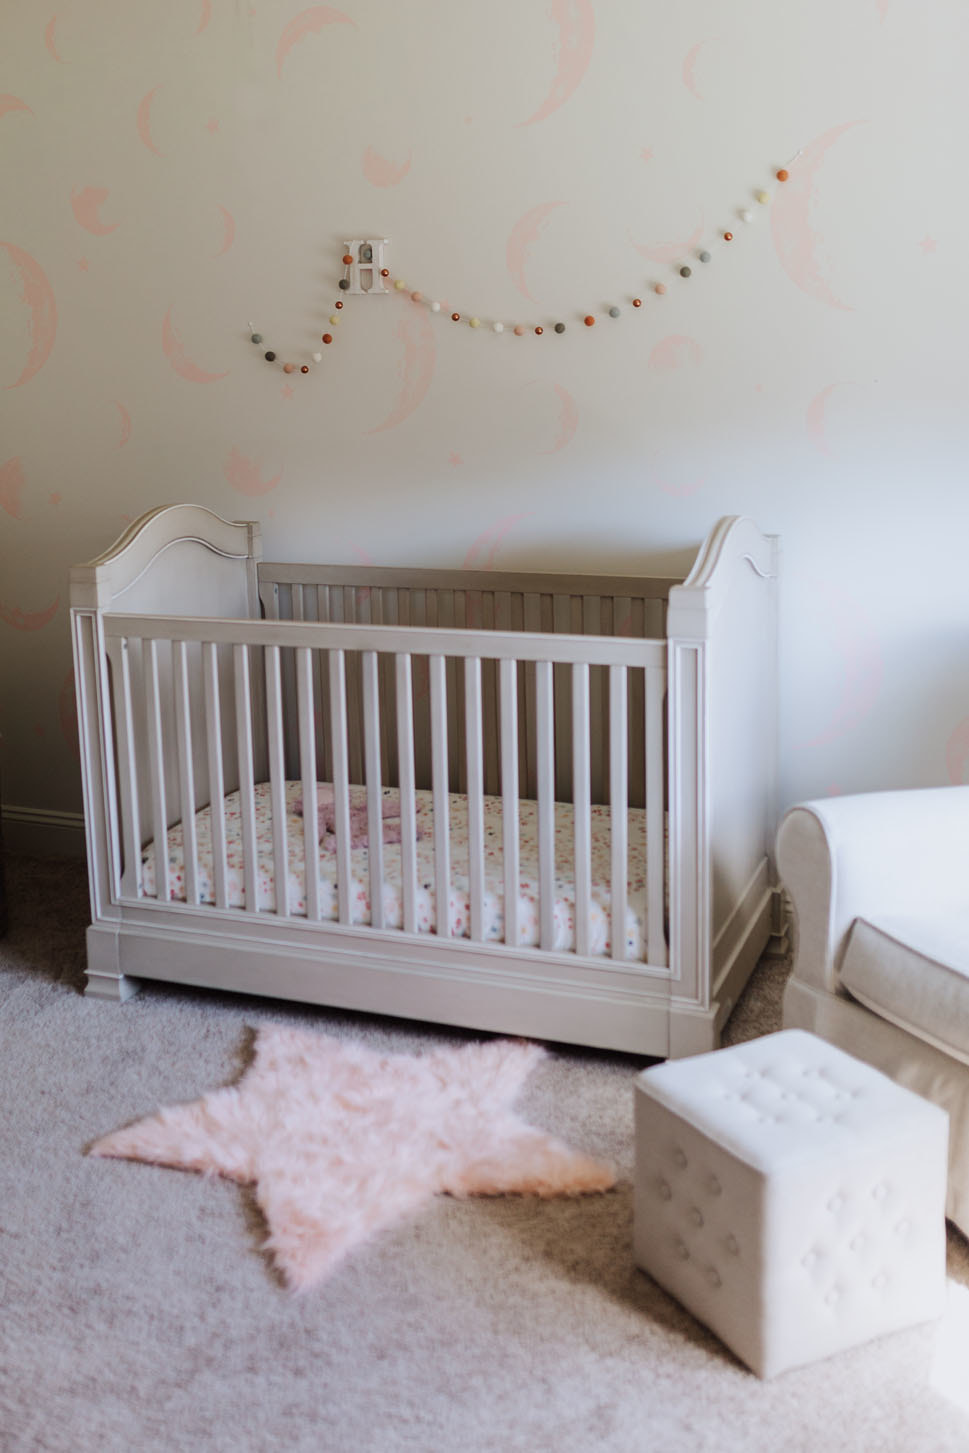 Custom painted moon mural behind crib in a pretty pink and white baby girl nursery